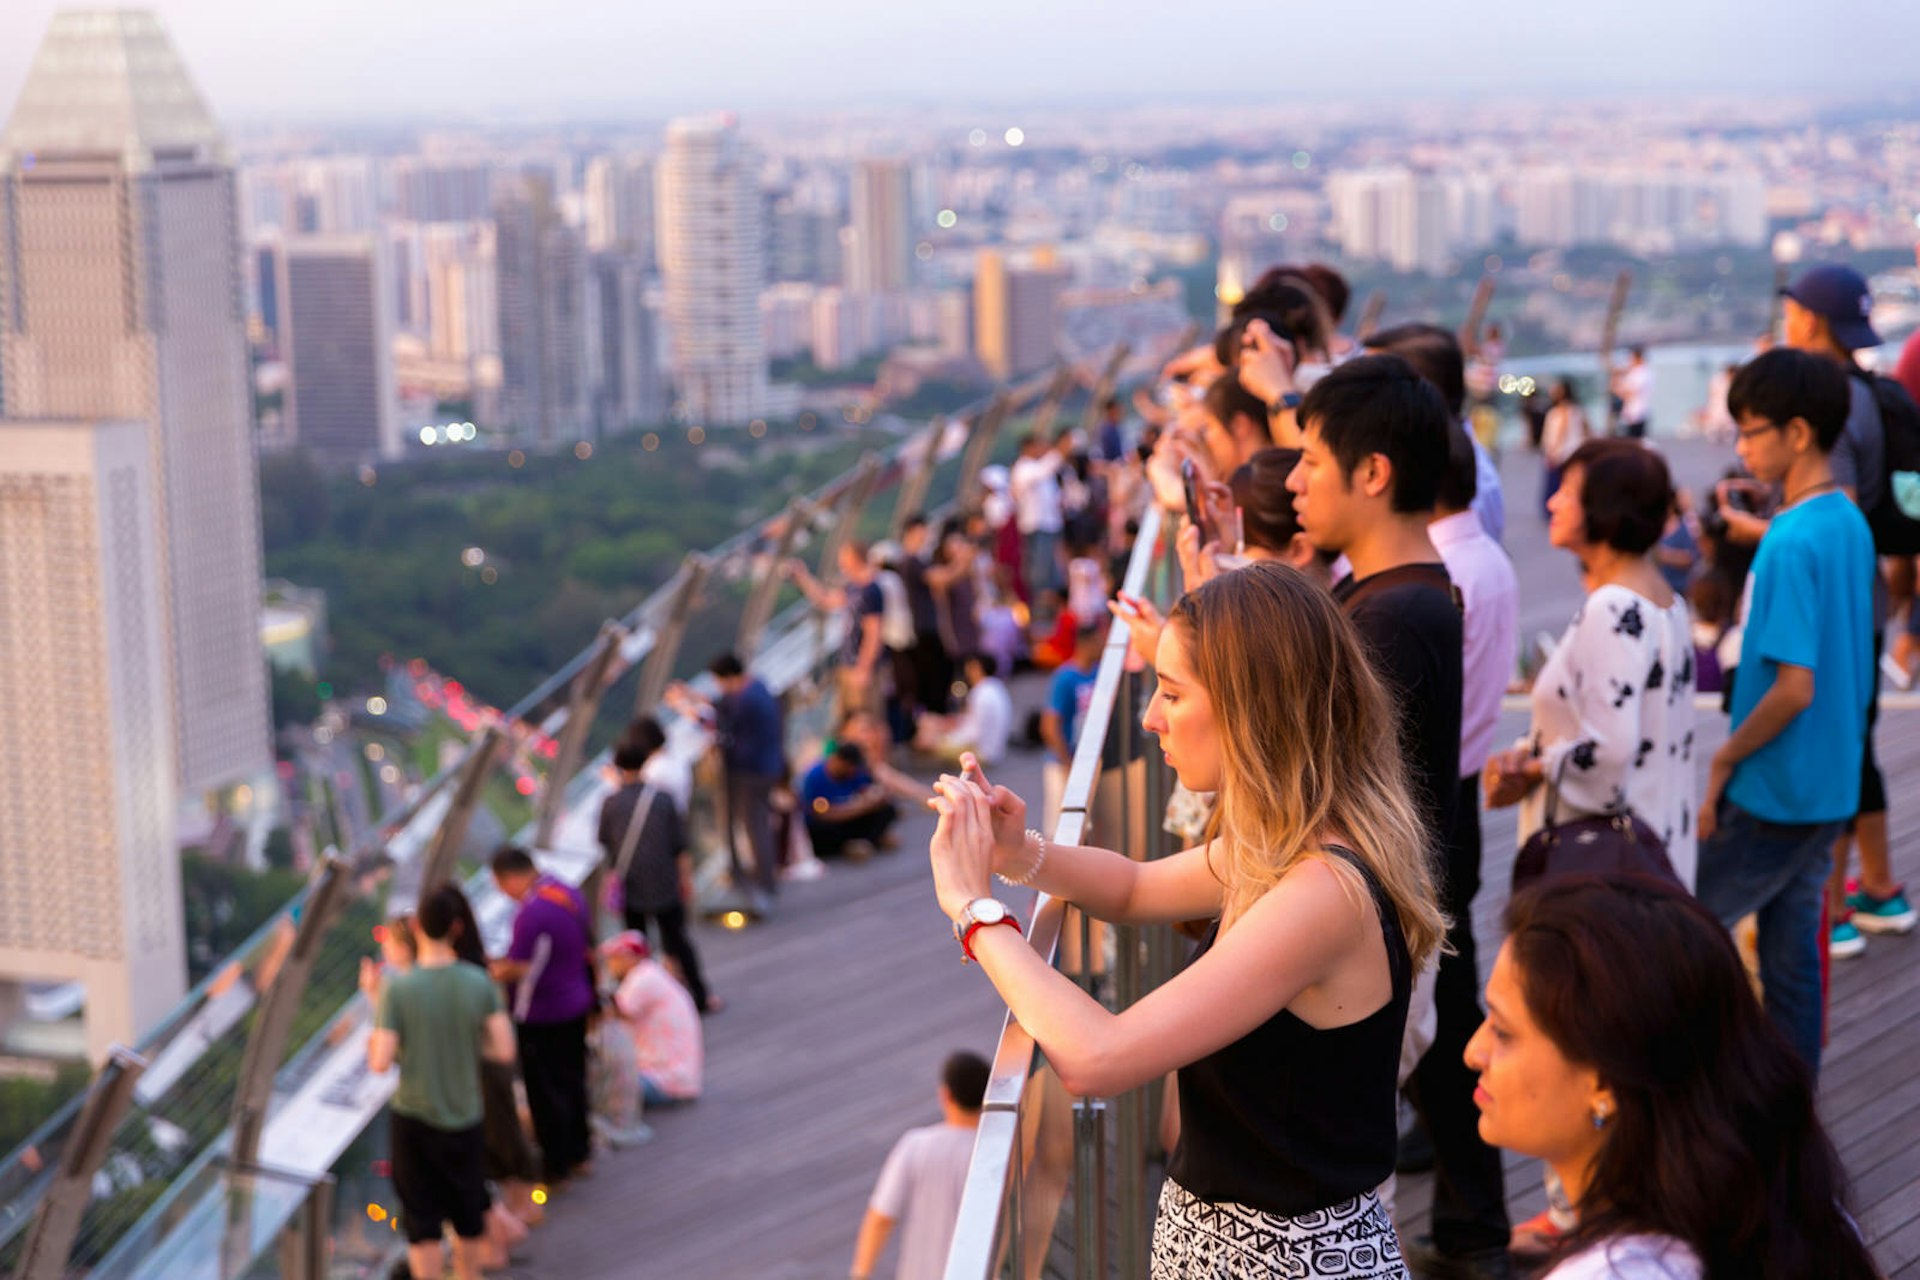 Tourists snap pictures from the observation deck atop Singapore's Marina Bay Sands building